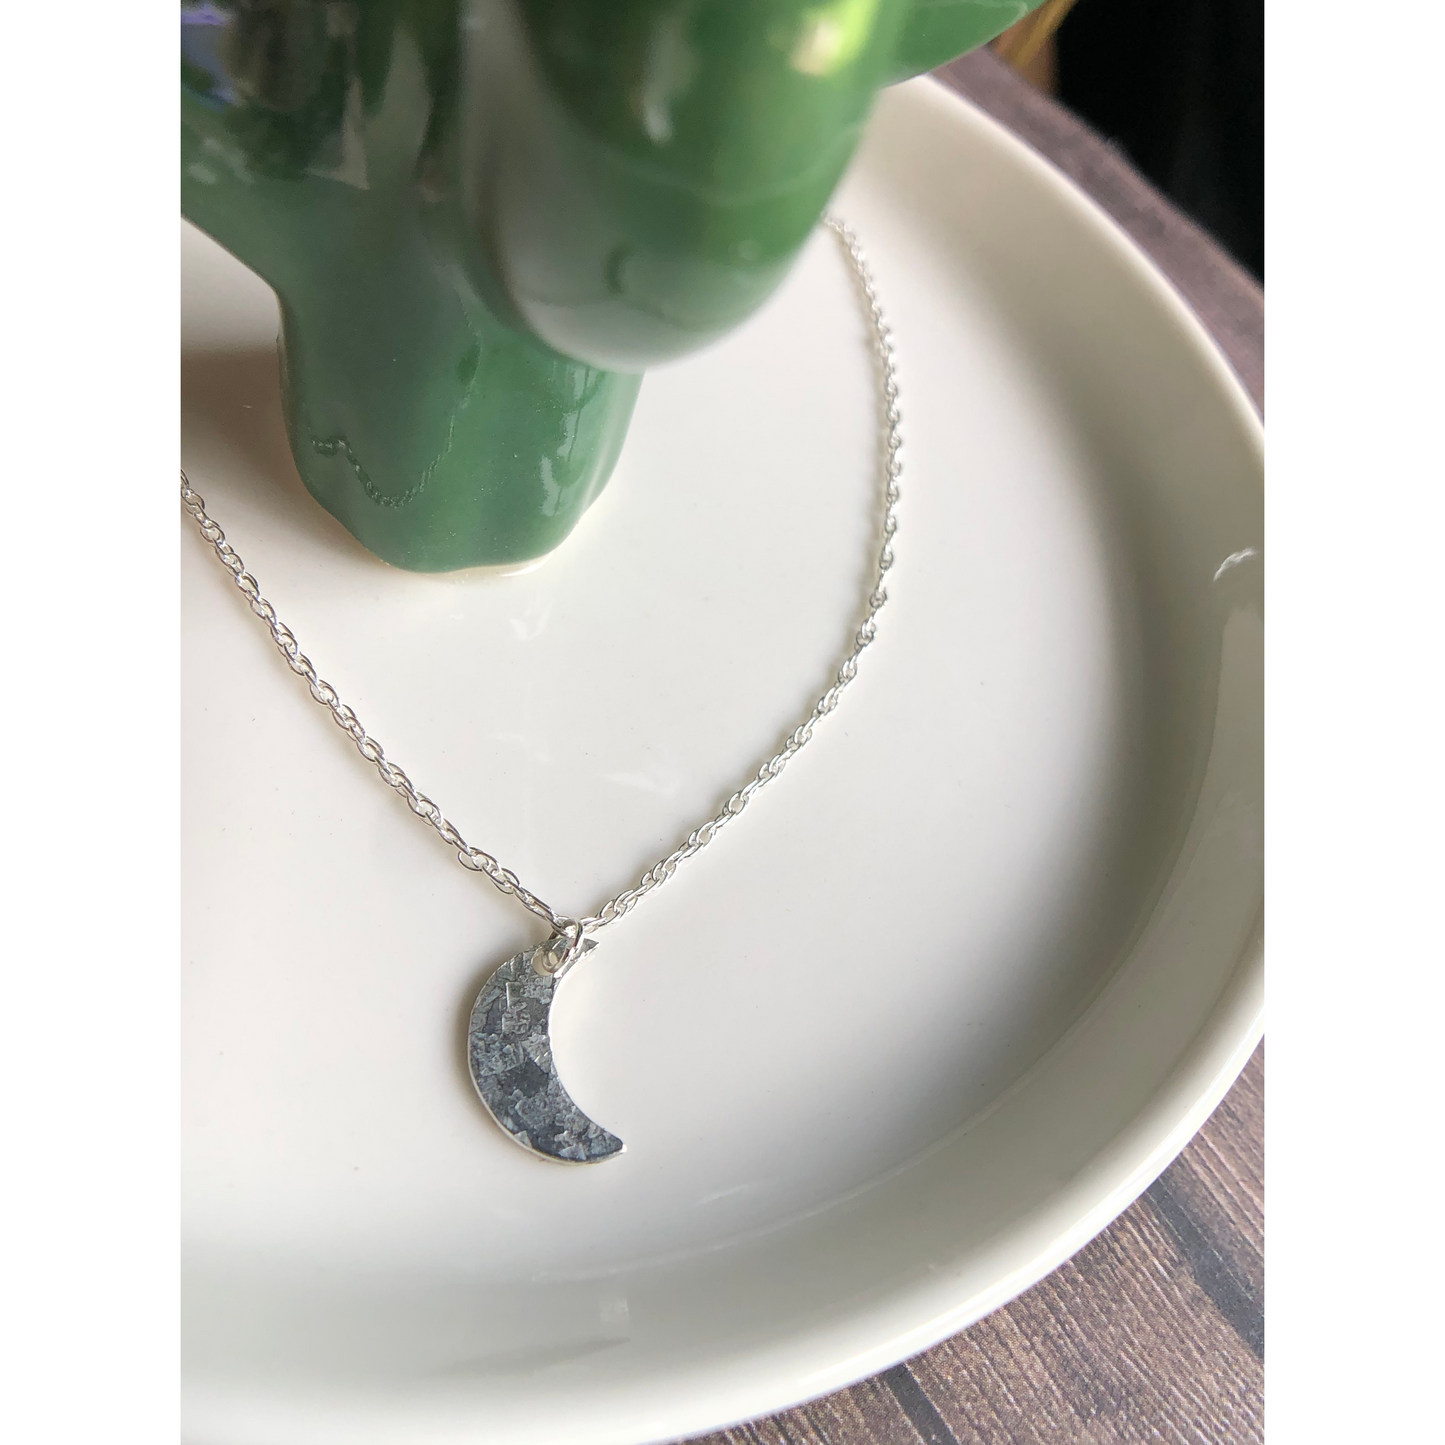 Simple silver chain with sterling silver cut moon mounted on the middle